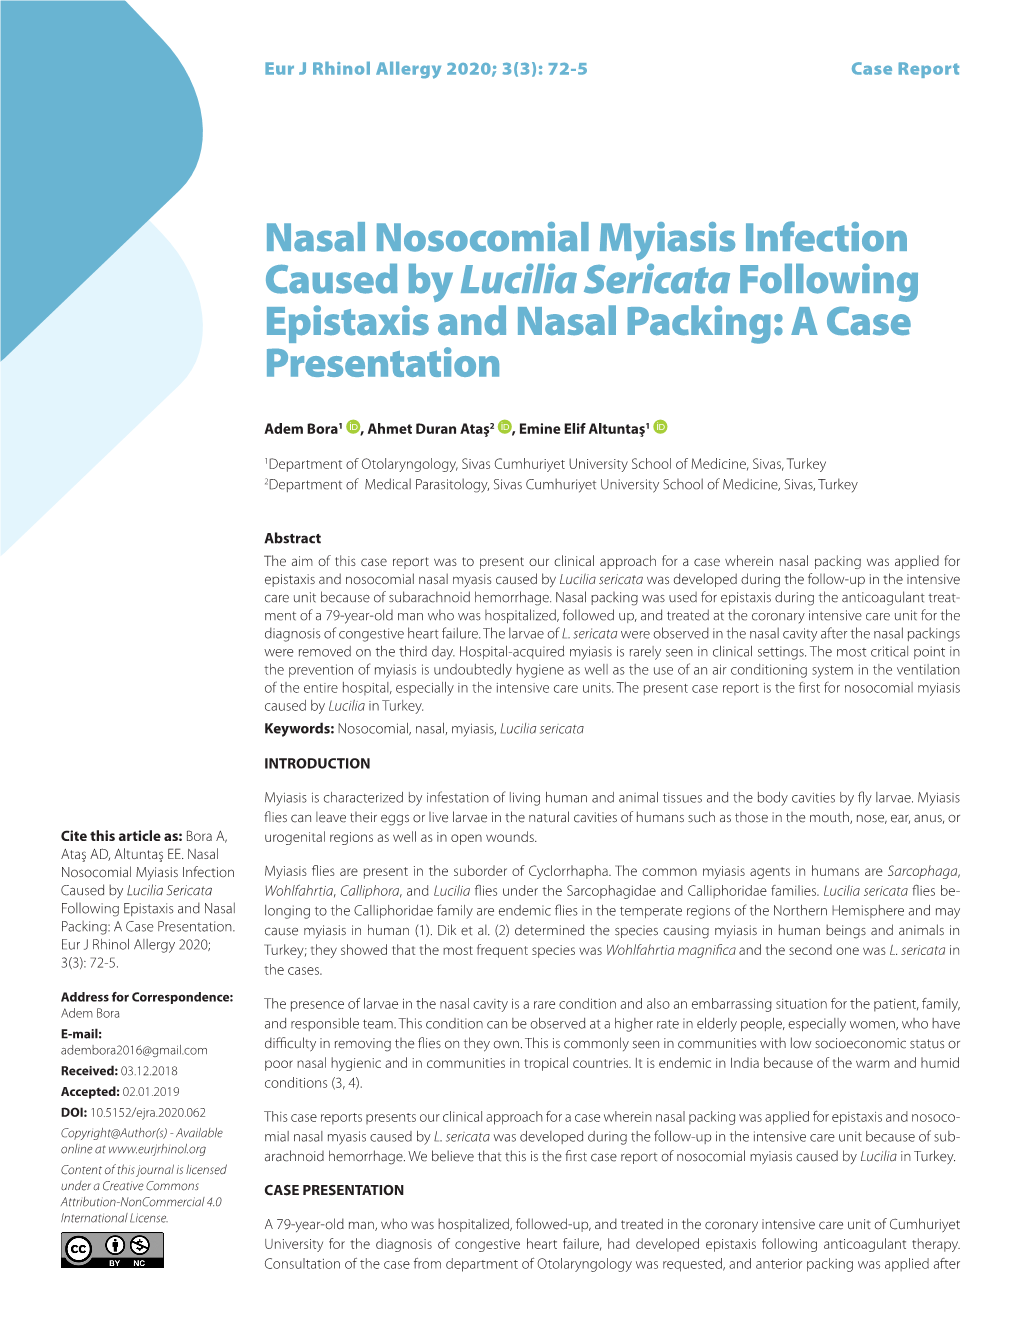 Nasal Nosocomial Myiasis Infection Caused by Lucilia Sericata Following Epistaxis and Nasal Packing: a Case Presentation